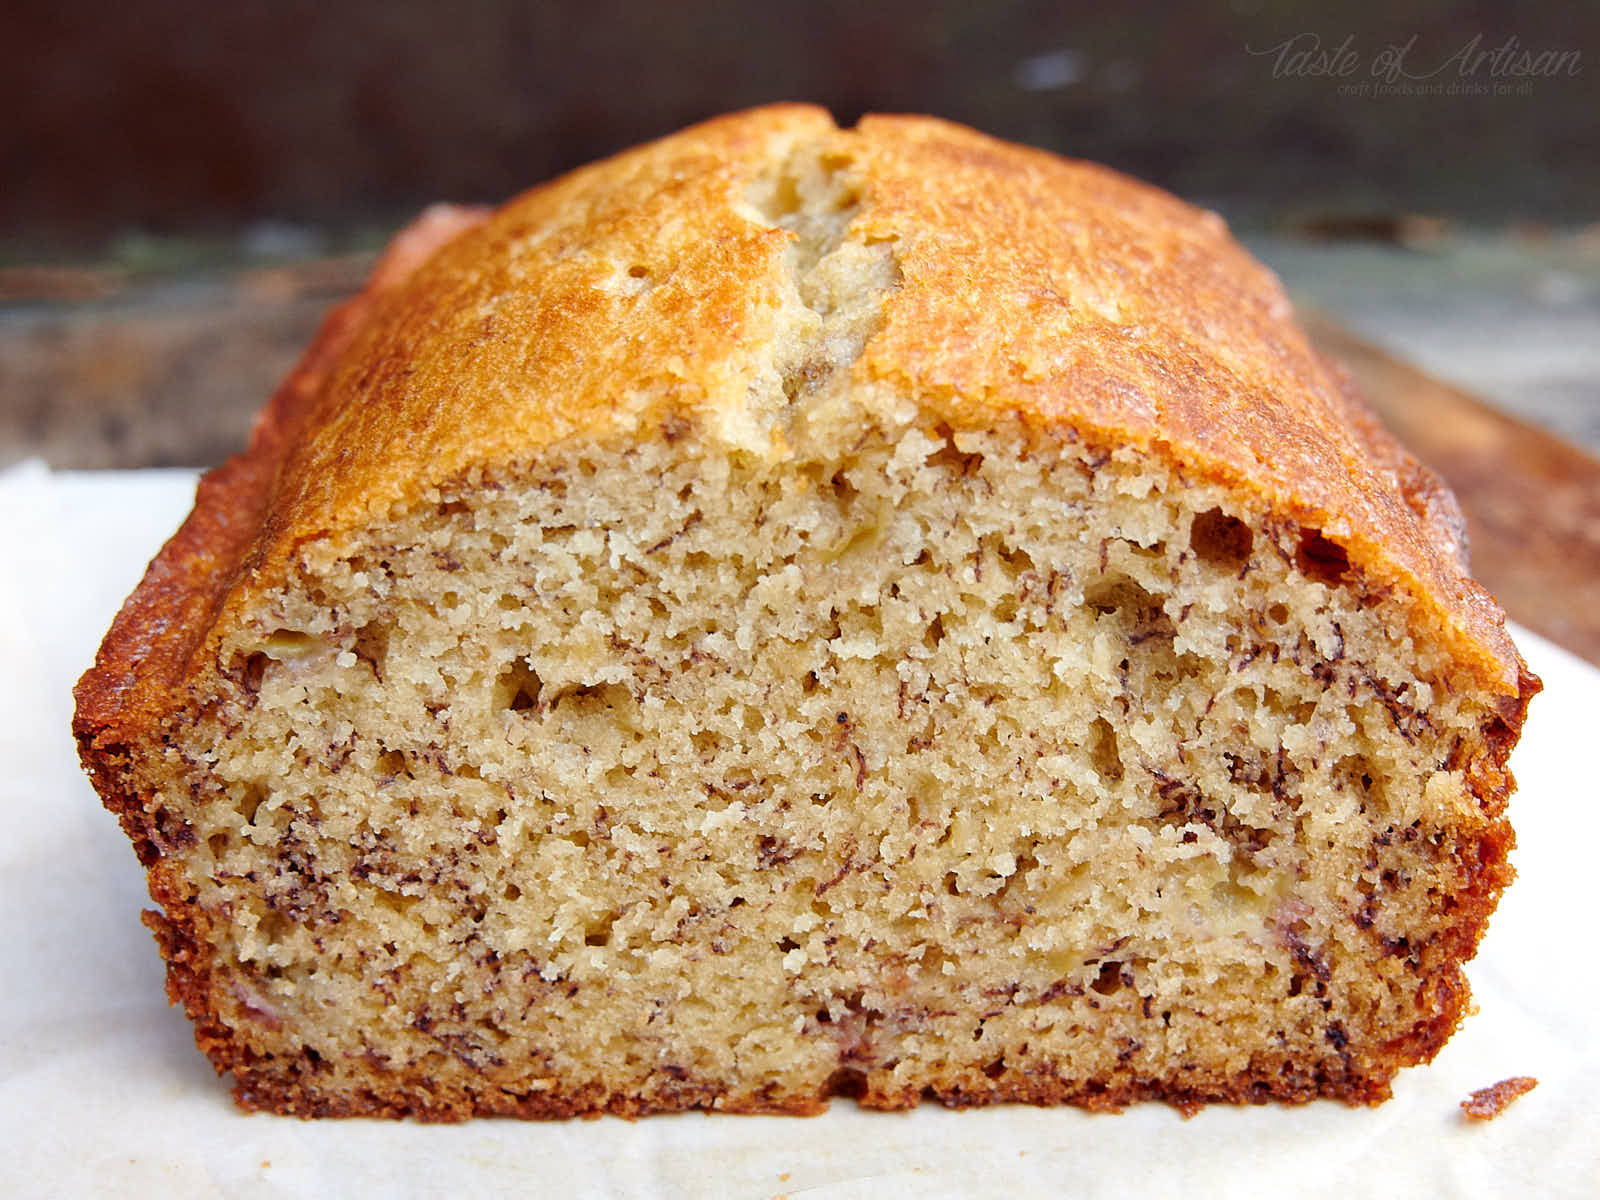 The Best tasting Banana Bread ever! No need for a mixer! Delicious, moist and simple classic banana bread recipe. | Taste of Artisan